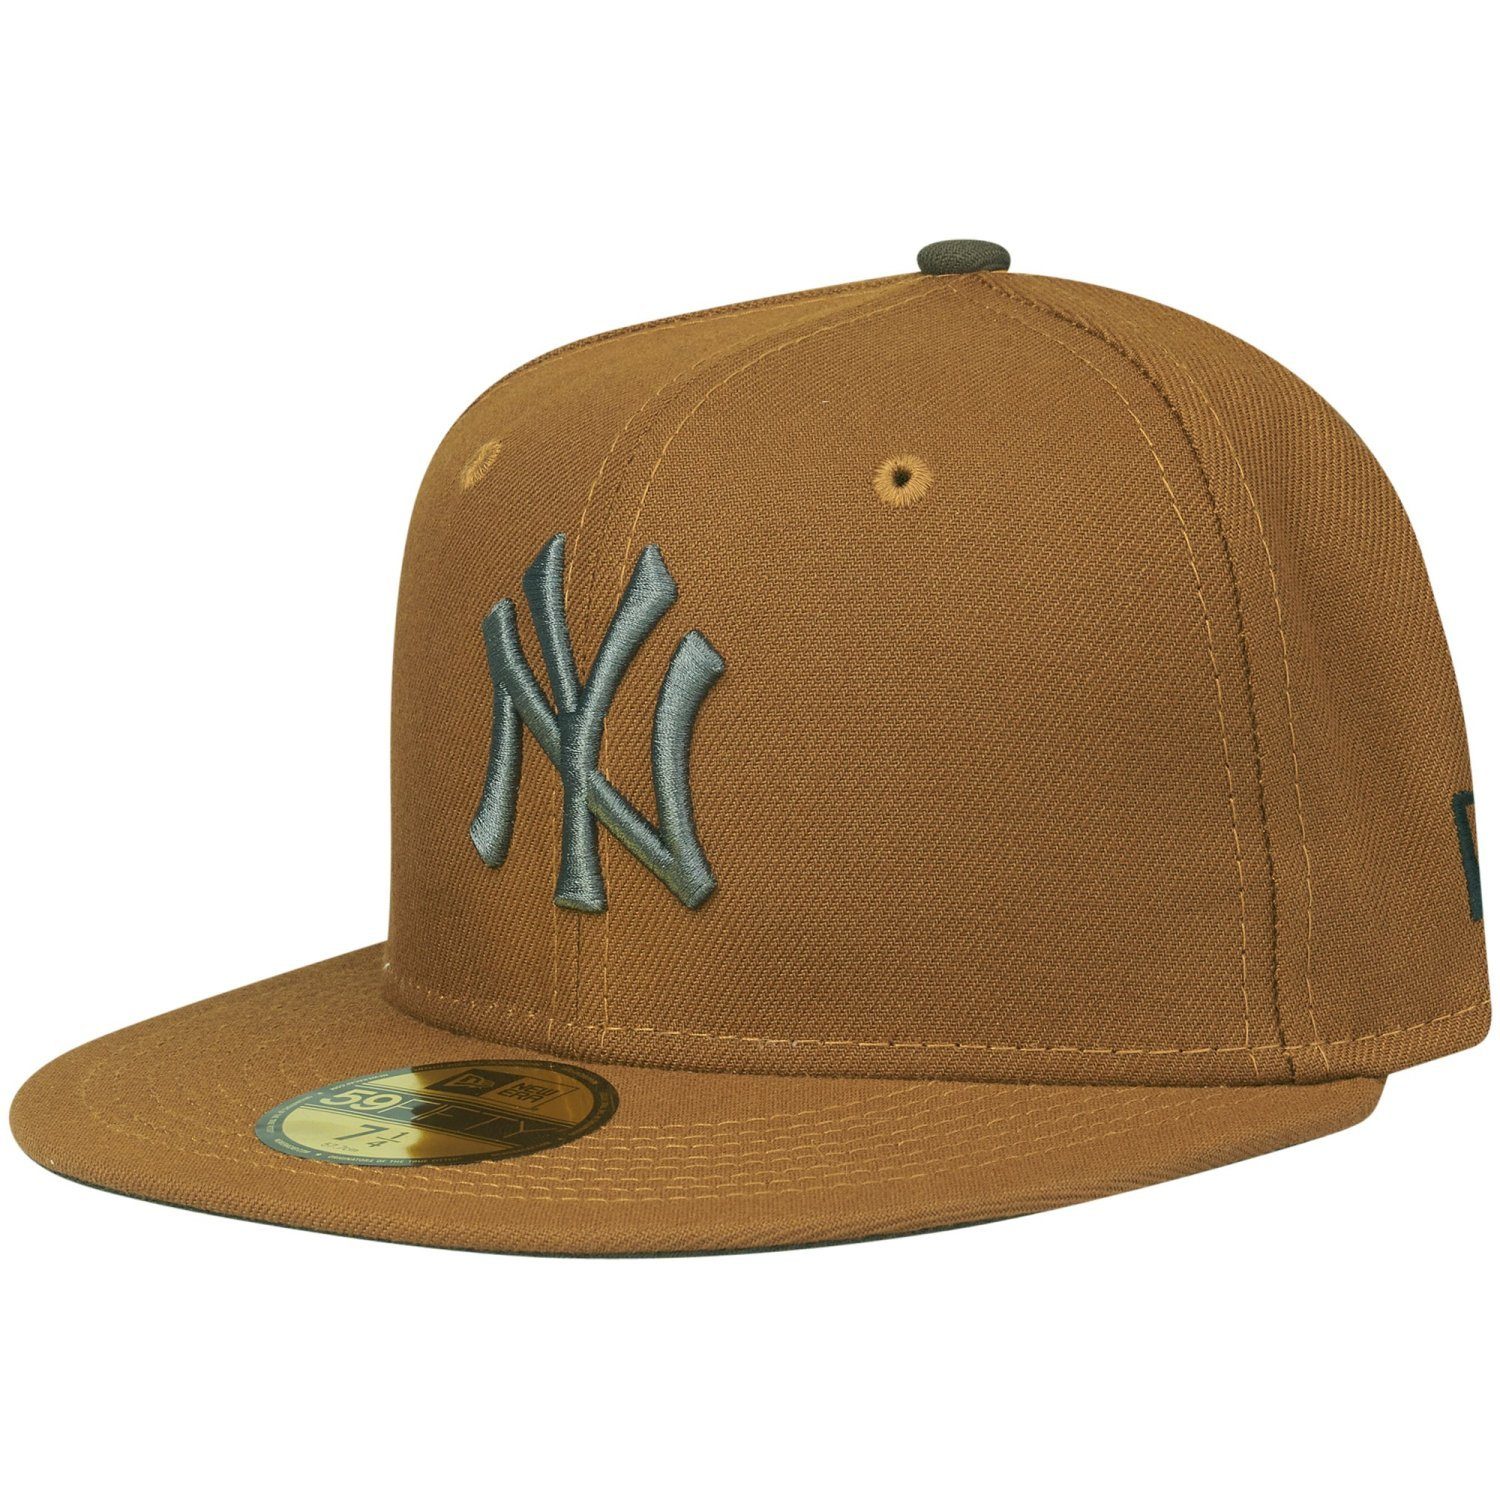 Fitted Era Cap SERIES WORLD 59Fifty NY New 1996 Yankees